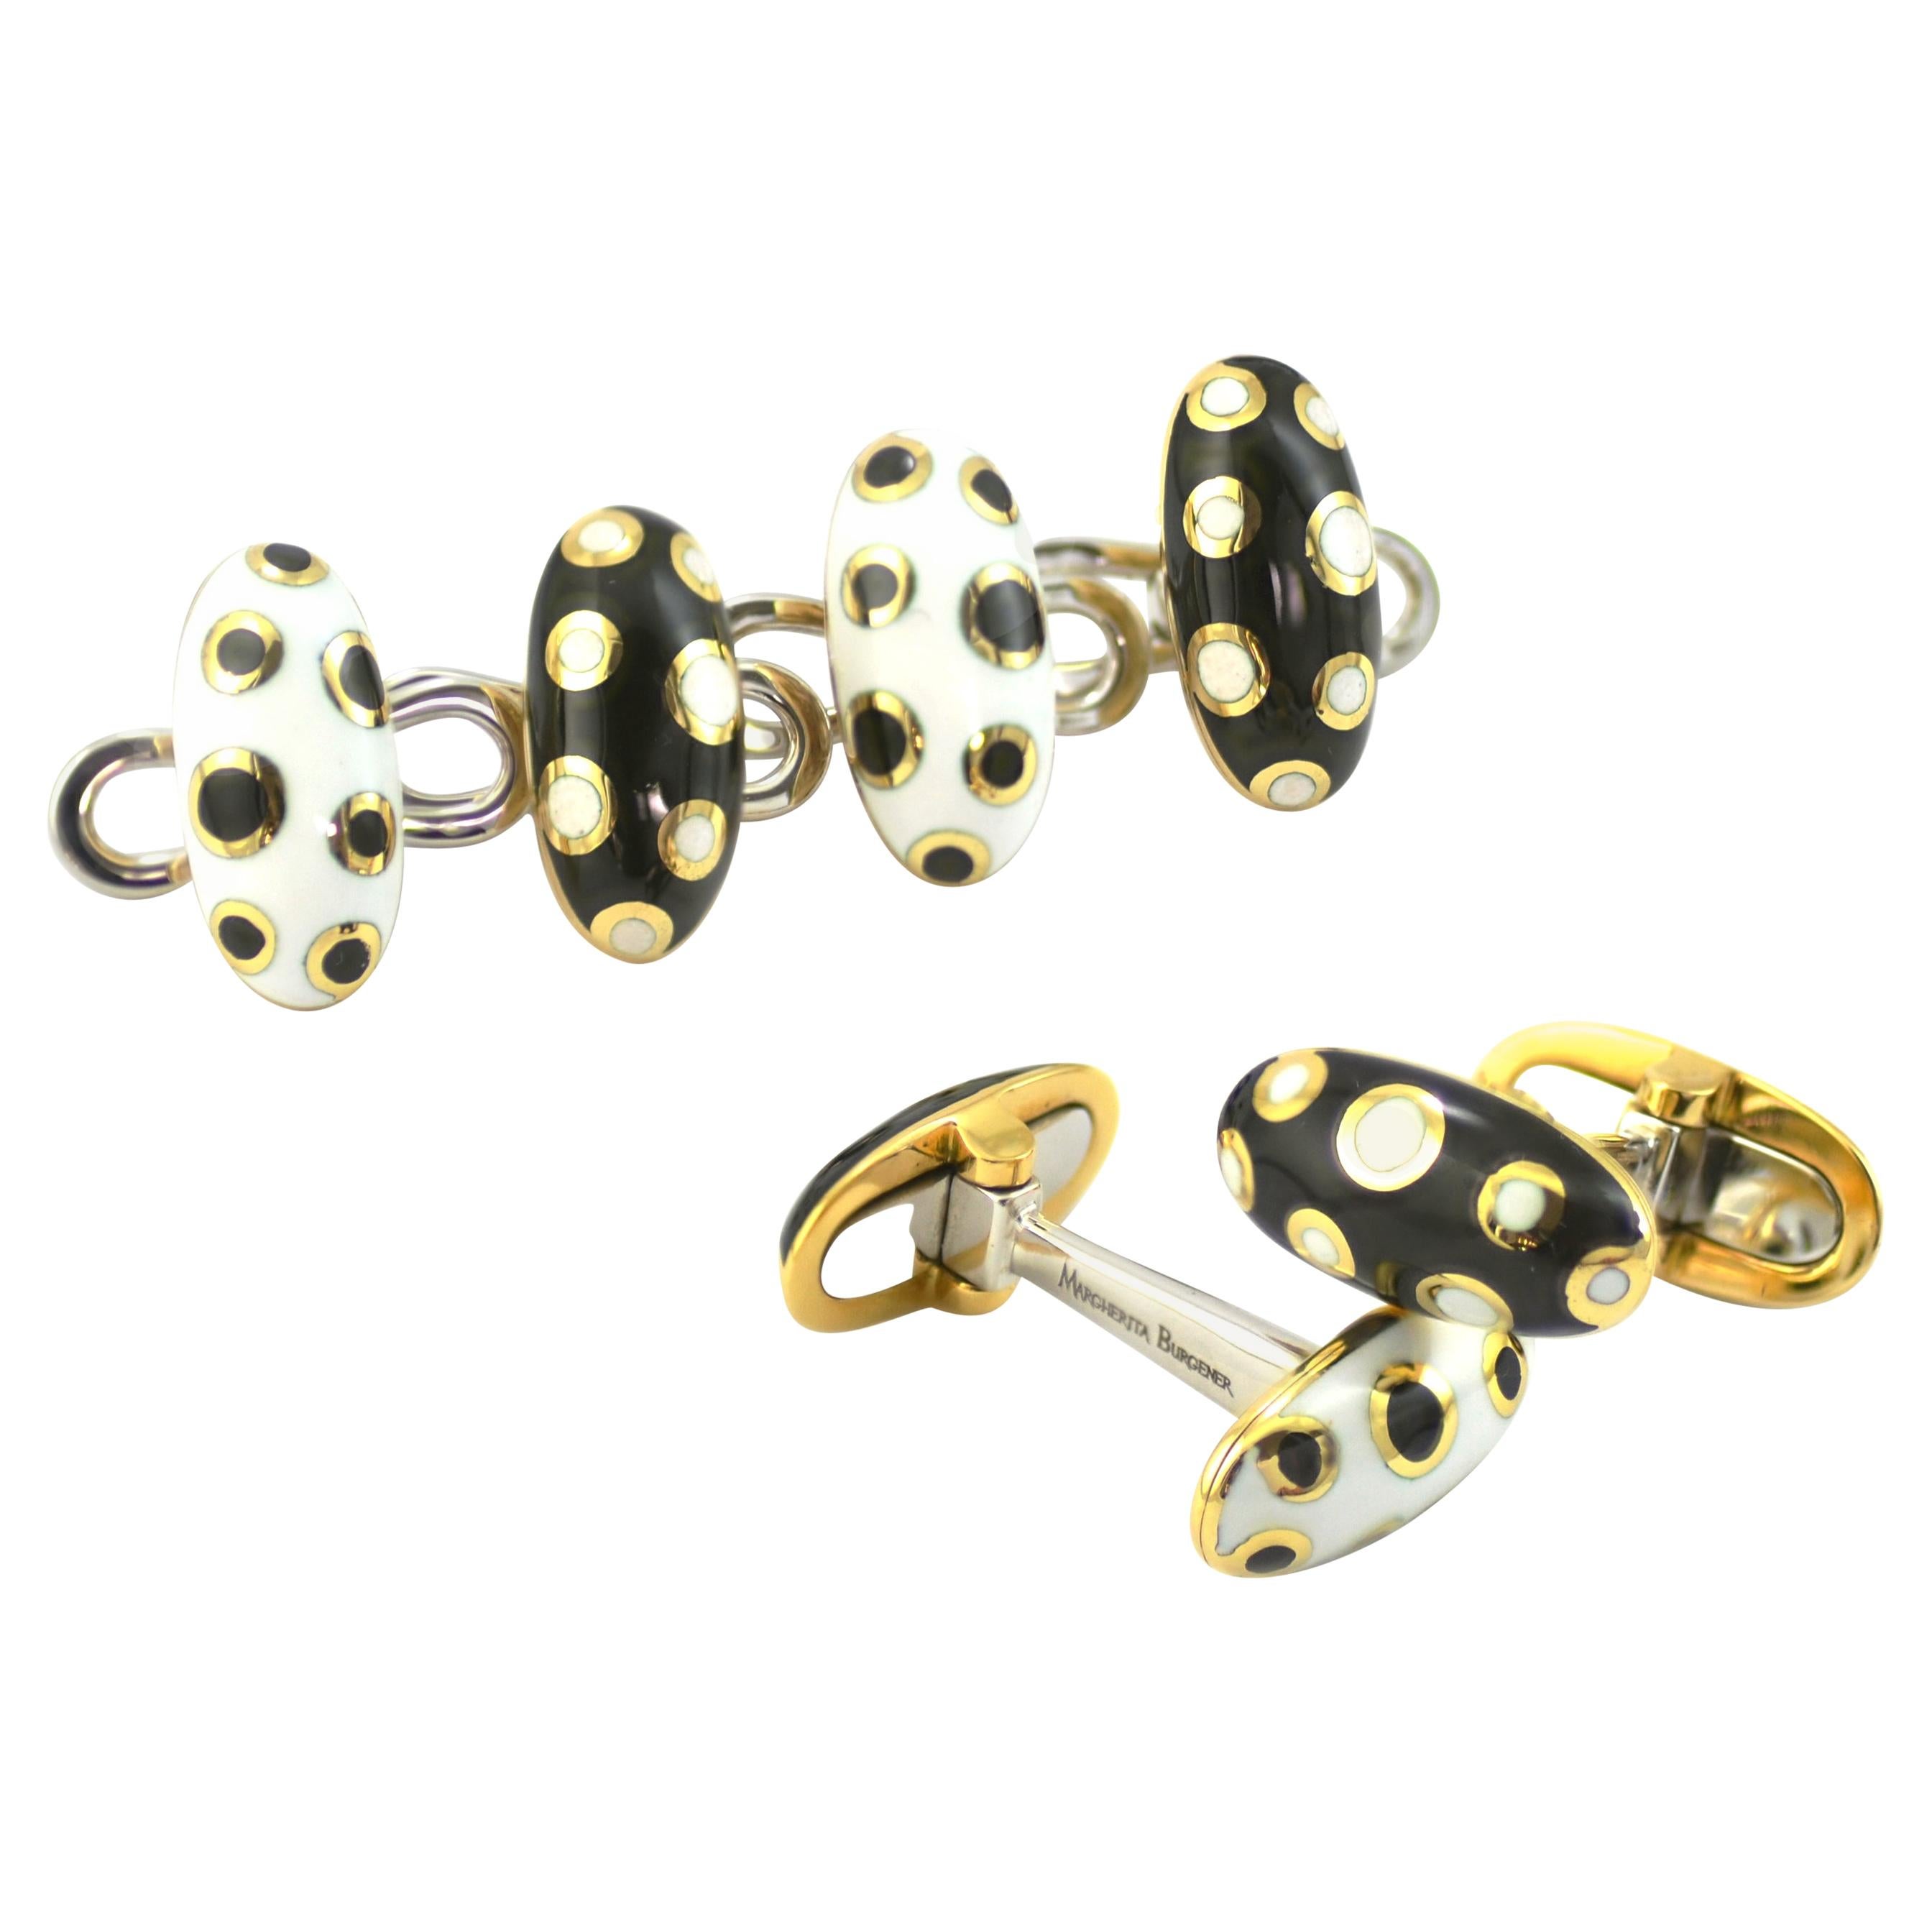 Polka Dot d Black and White Enamel 18 Kt Yellow Gold Studs and Cufflinks